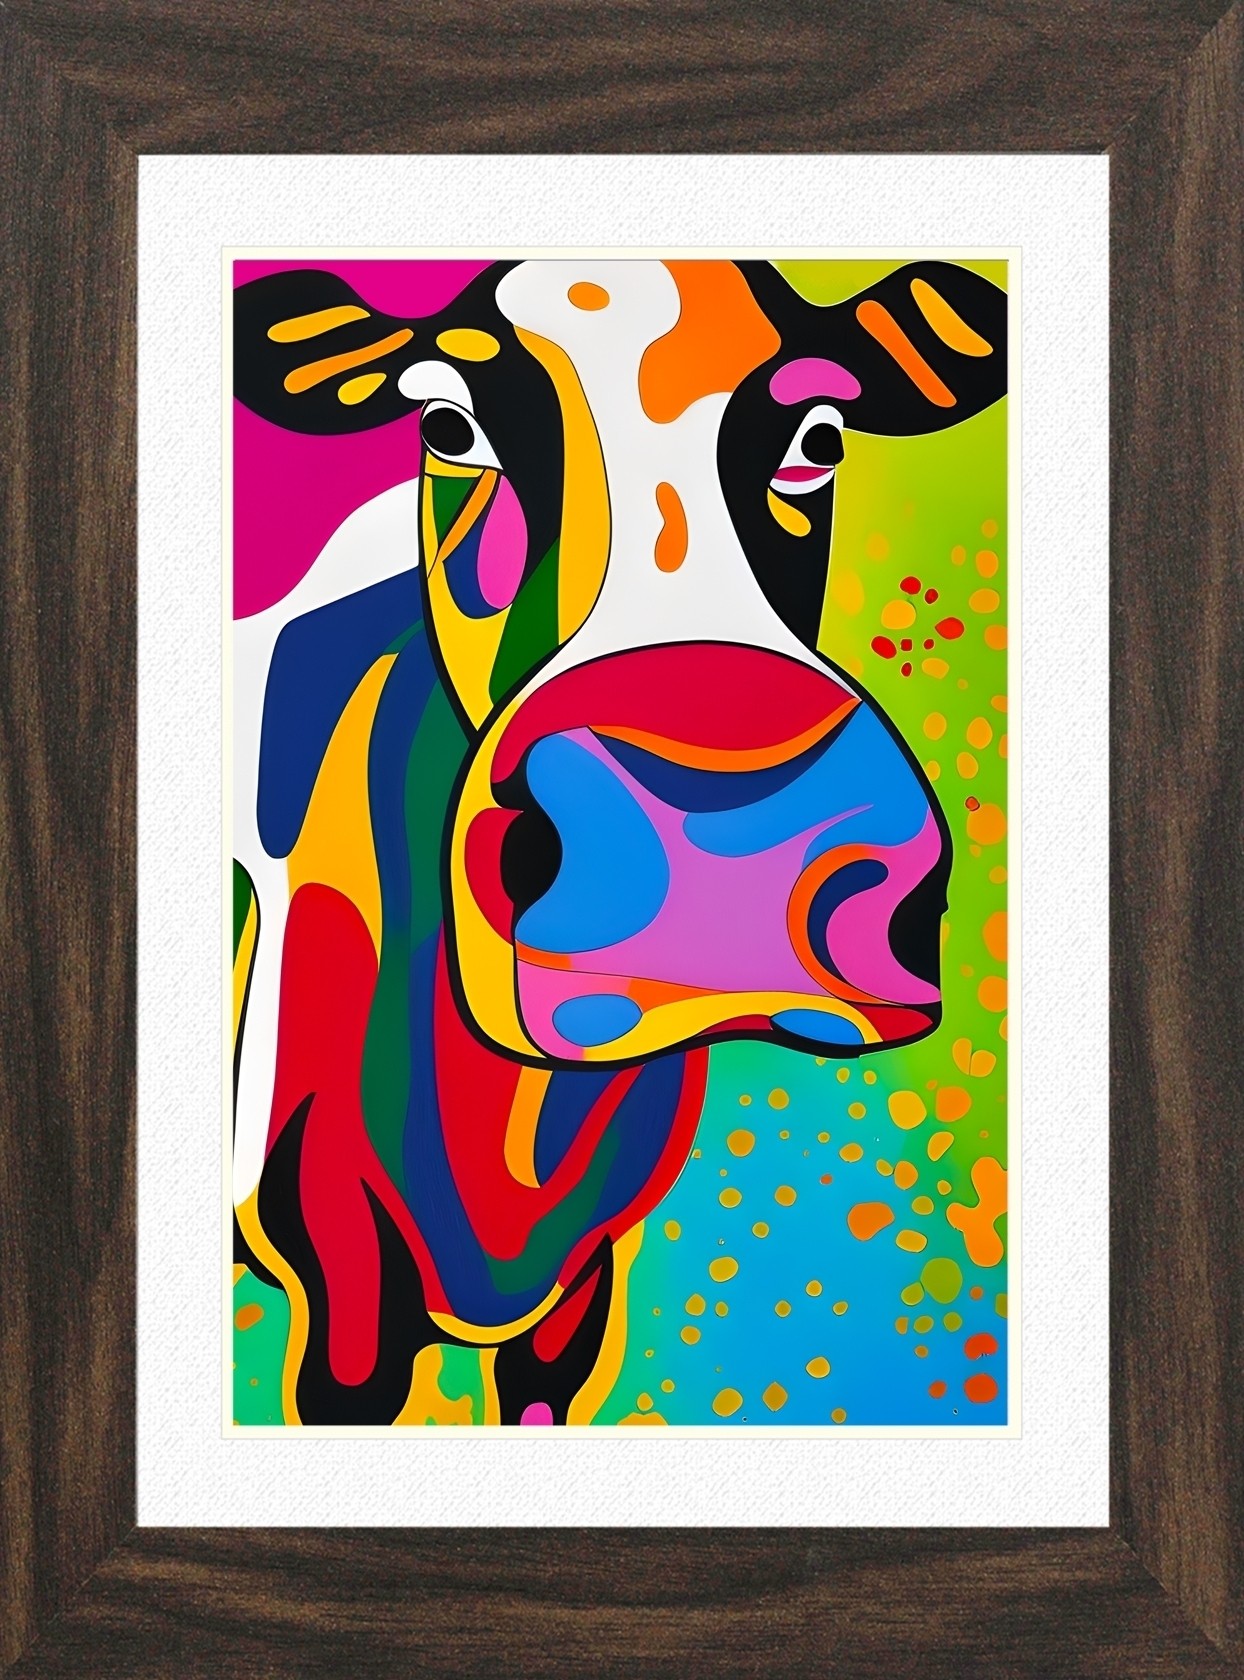 Cow Animal Picture Framed Colourful Abstract Art (30cm x 25cm Walnut Frame)